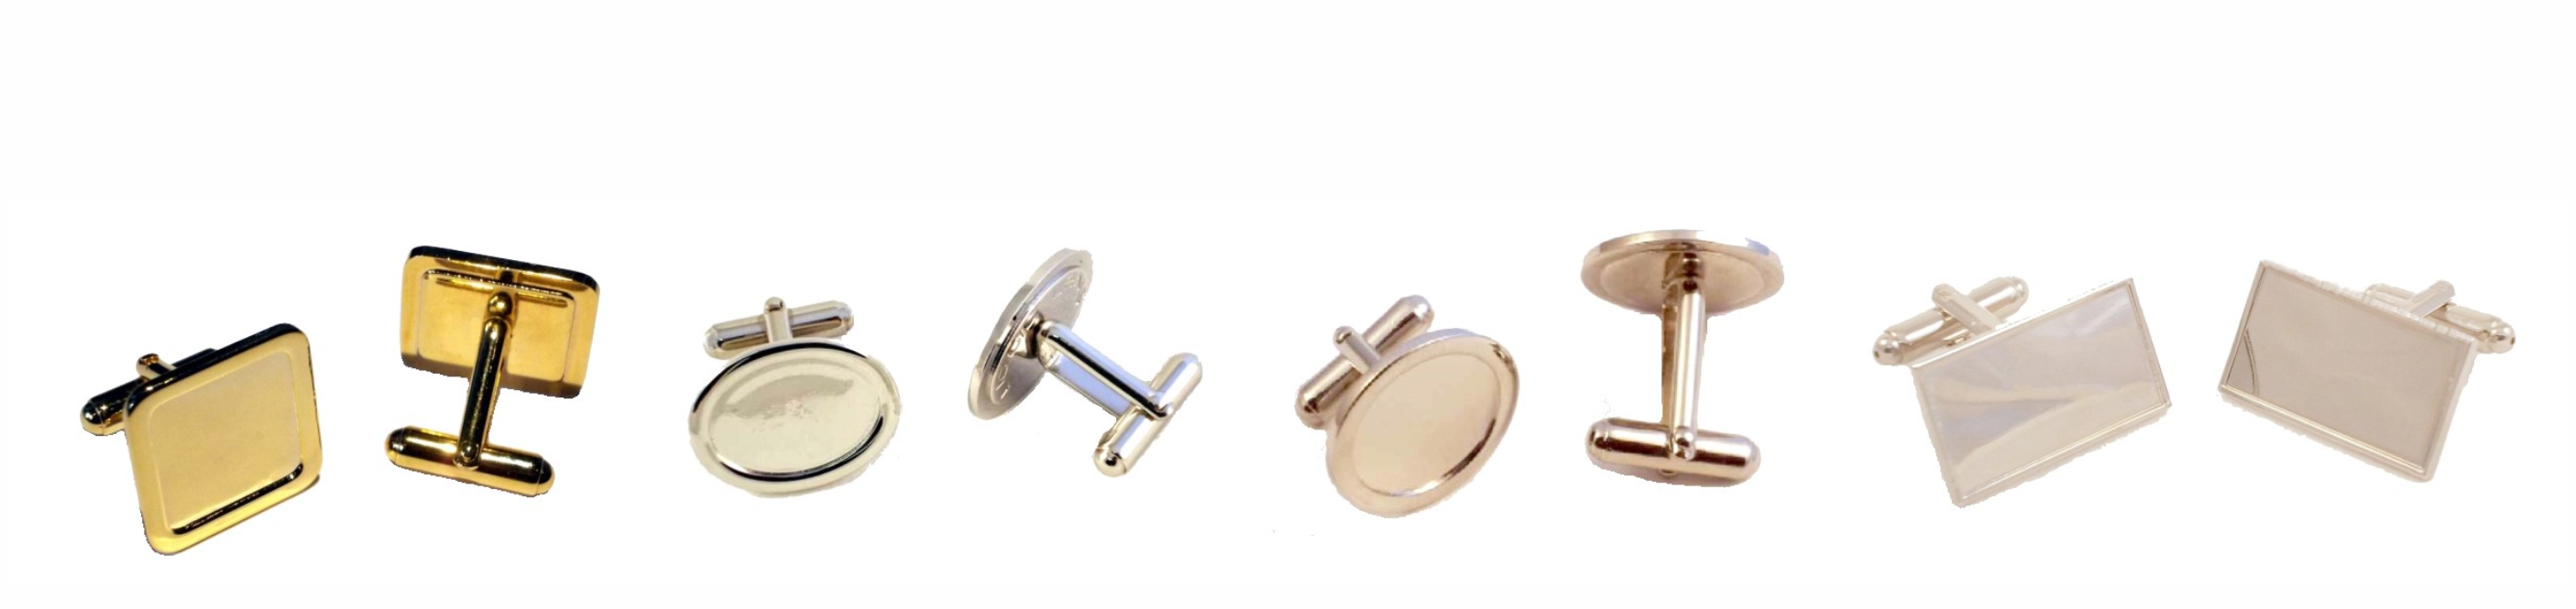 Cufflink Blanks with Clear Domes.